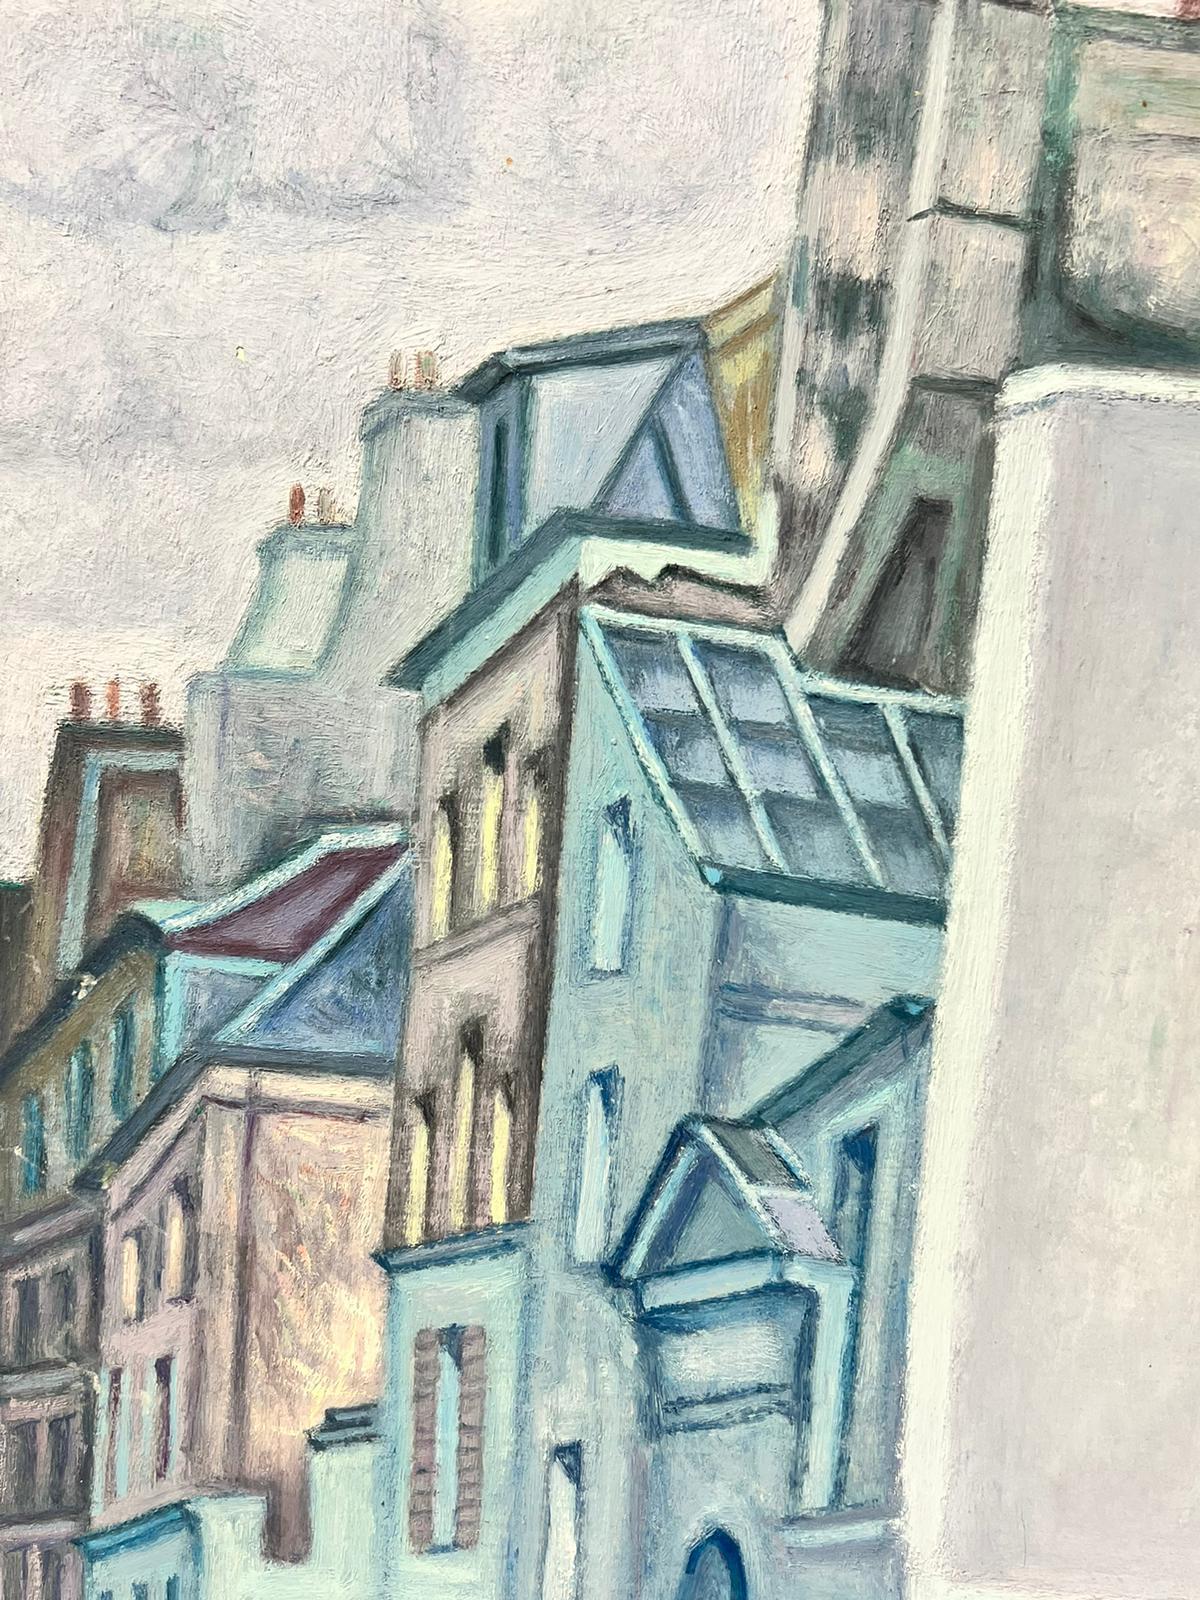 Mid 20th Century French Post-Impressionist Tall Blue Parisian Buildings - Modern Painting by French School